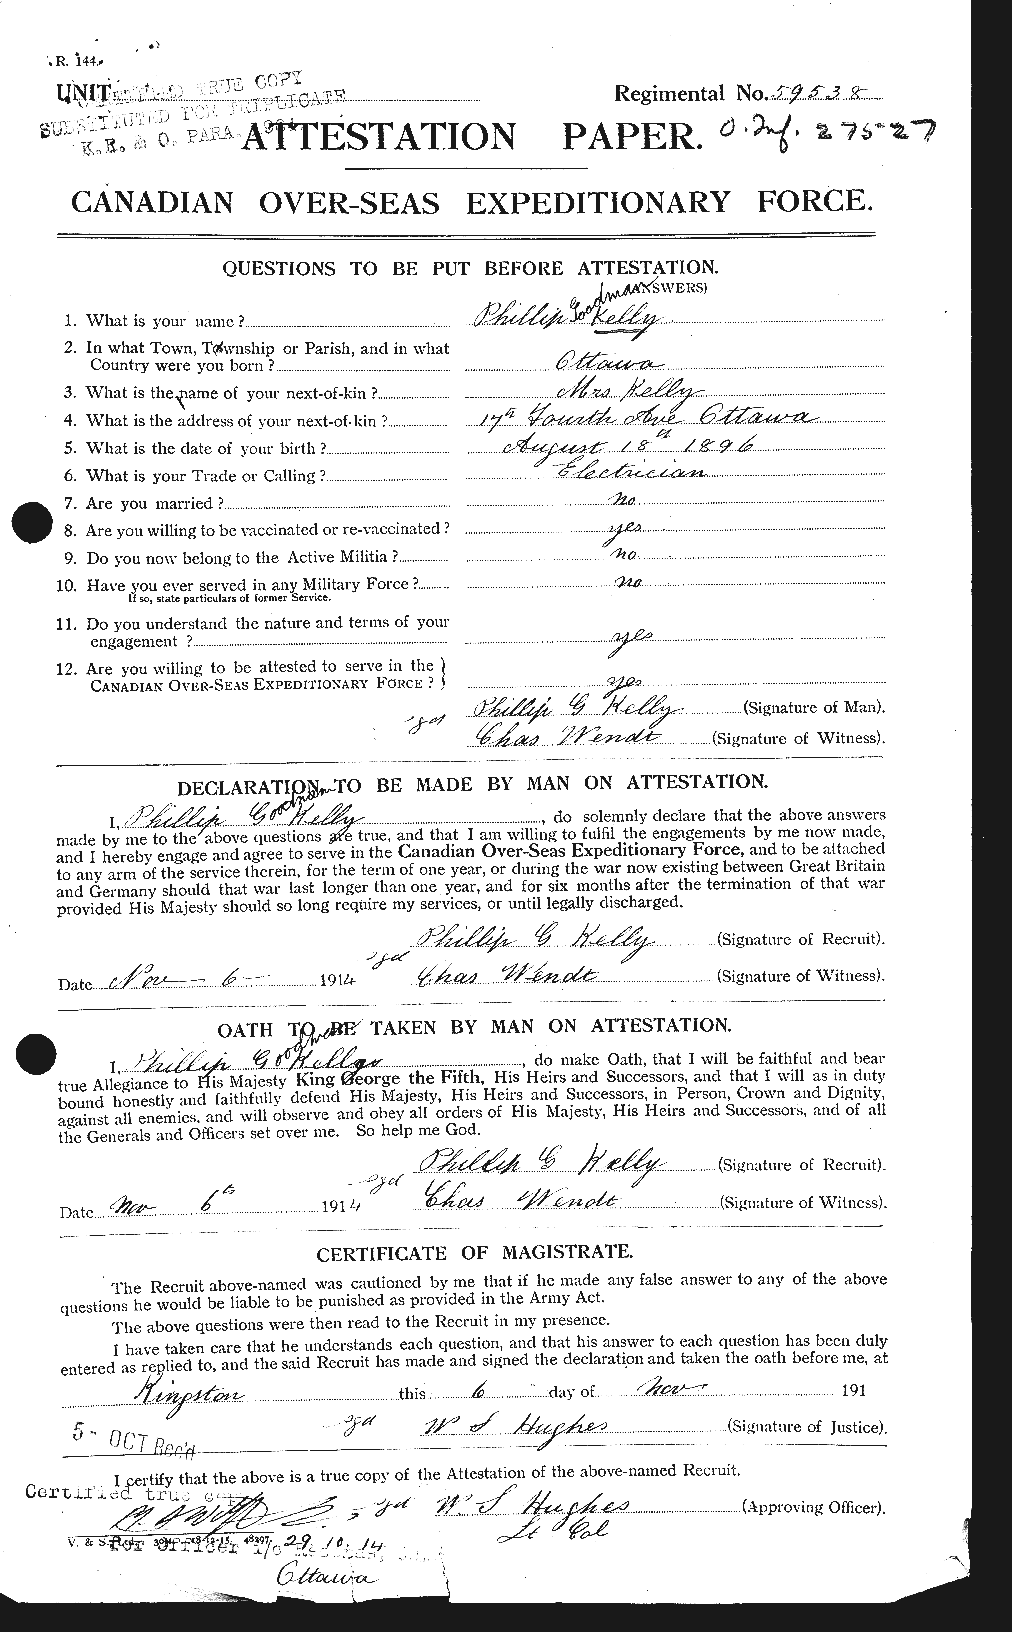 Personnel Records of the First World War - CEF 435969a